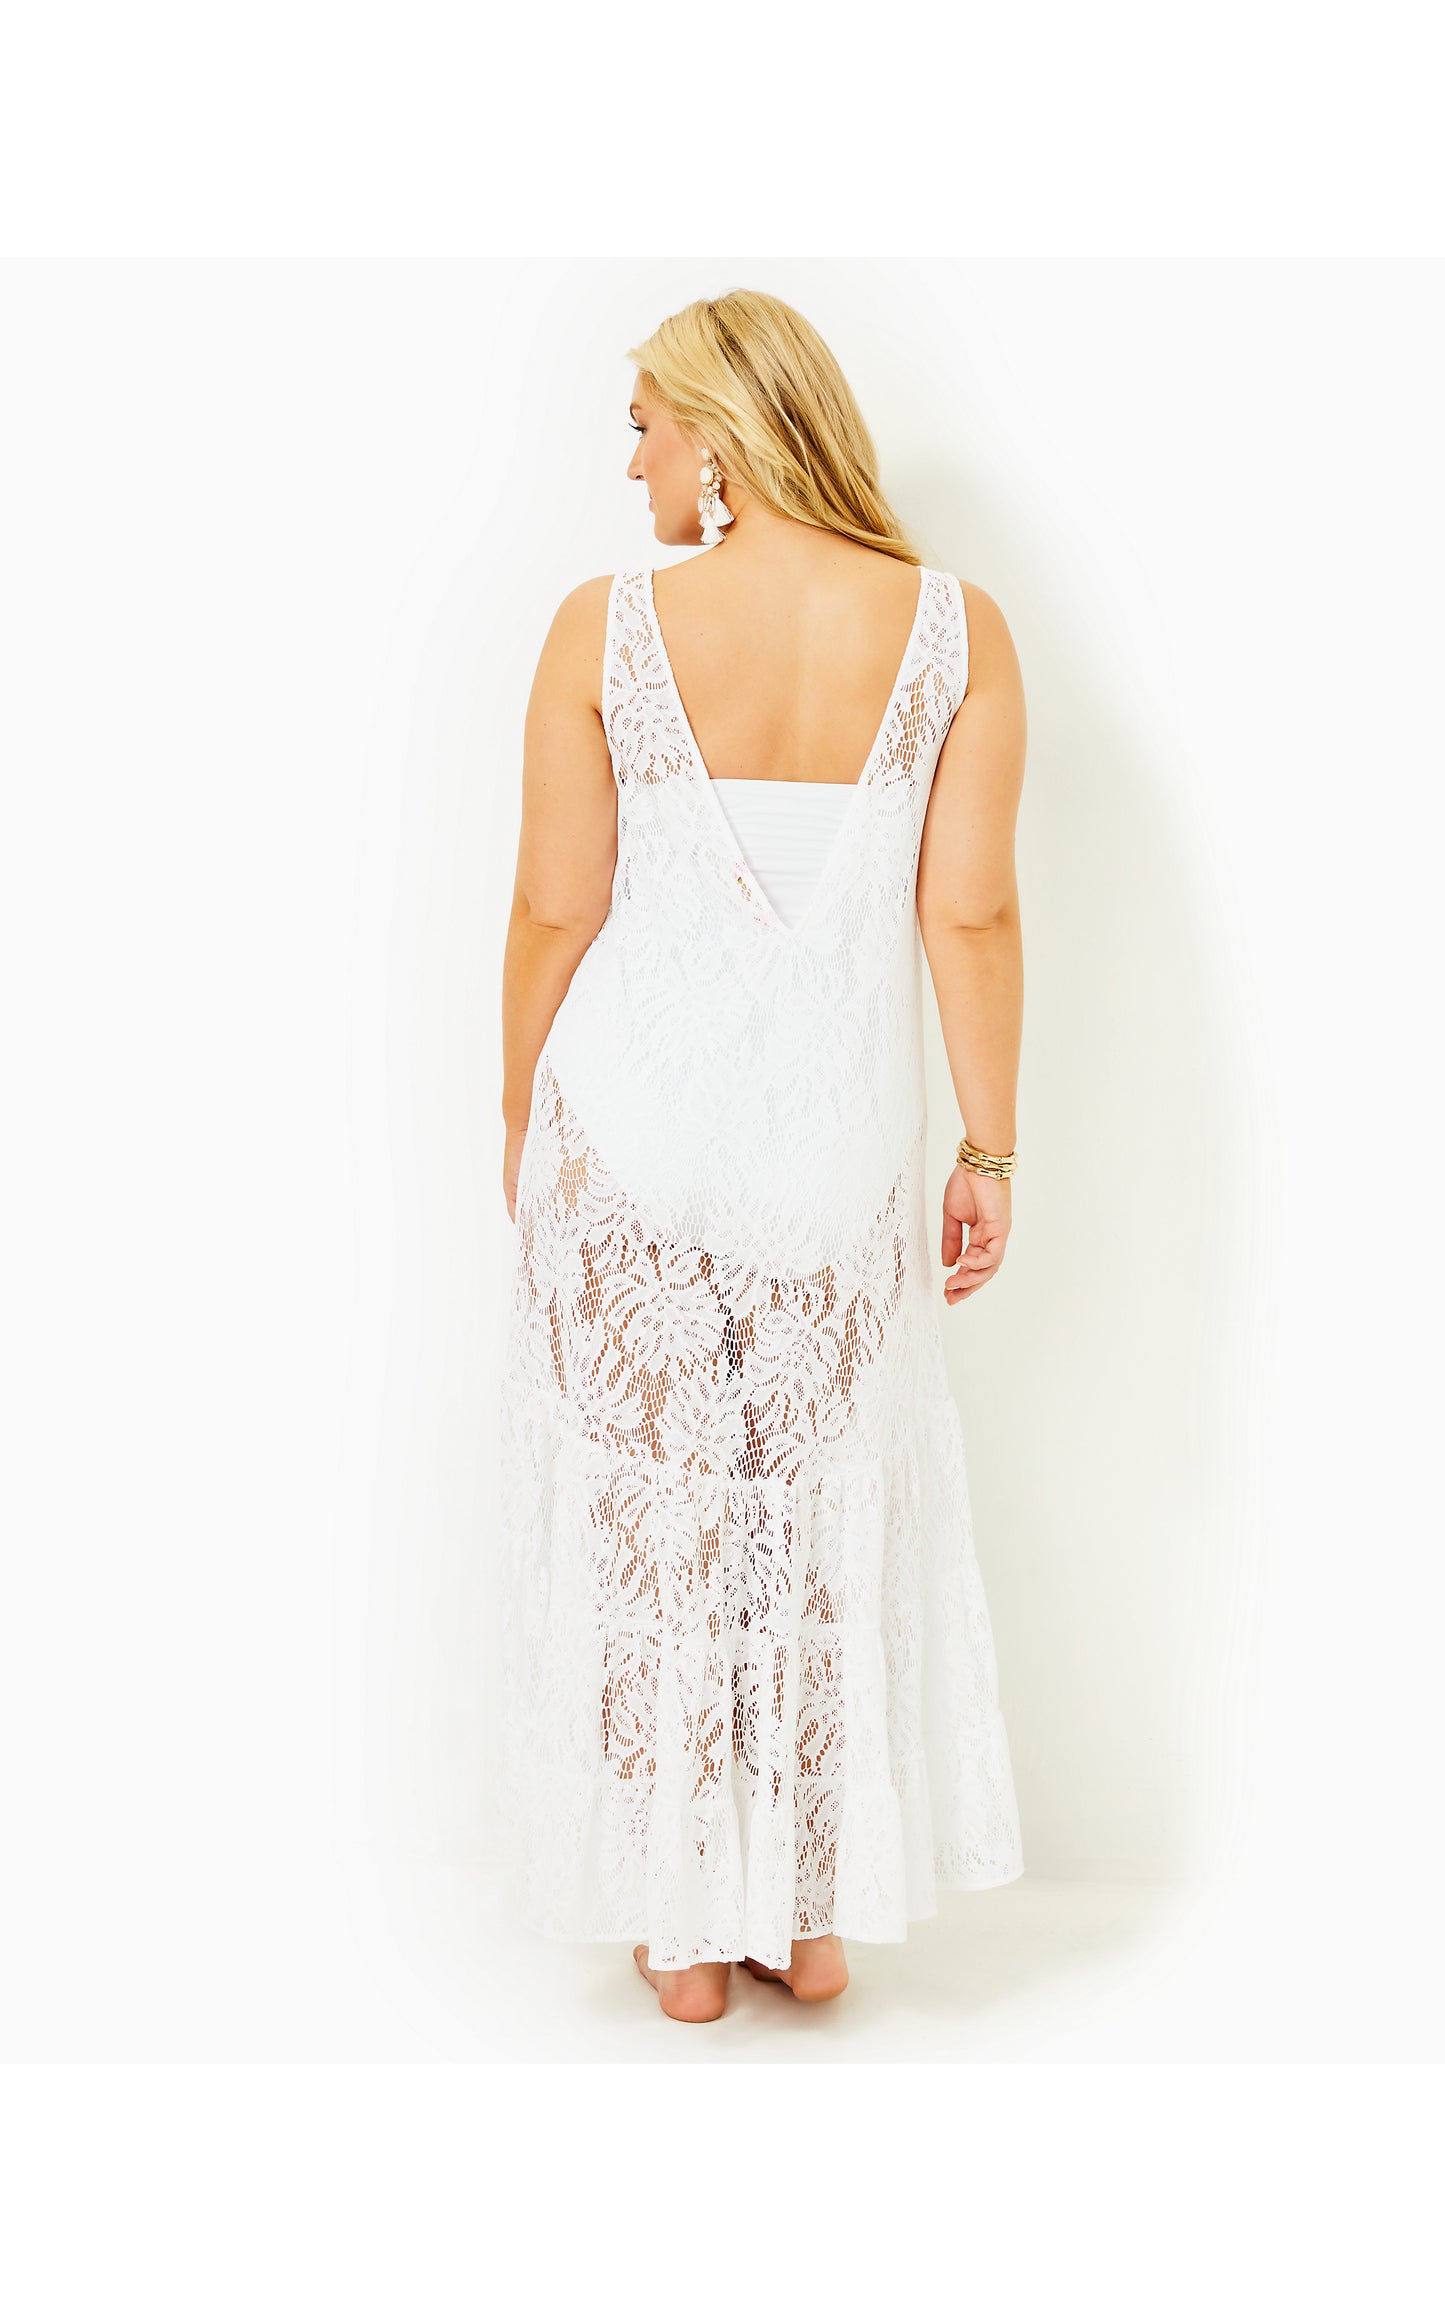 FINNLEY LACE COVERUP